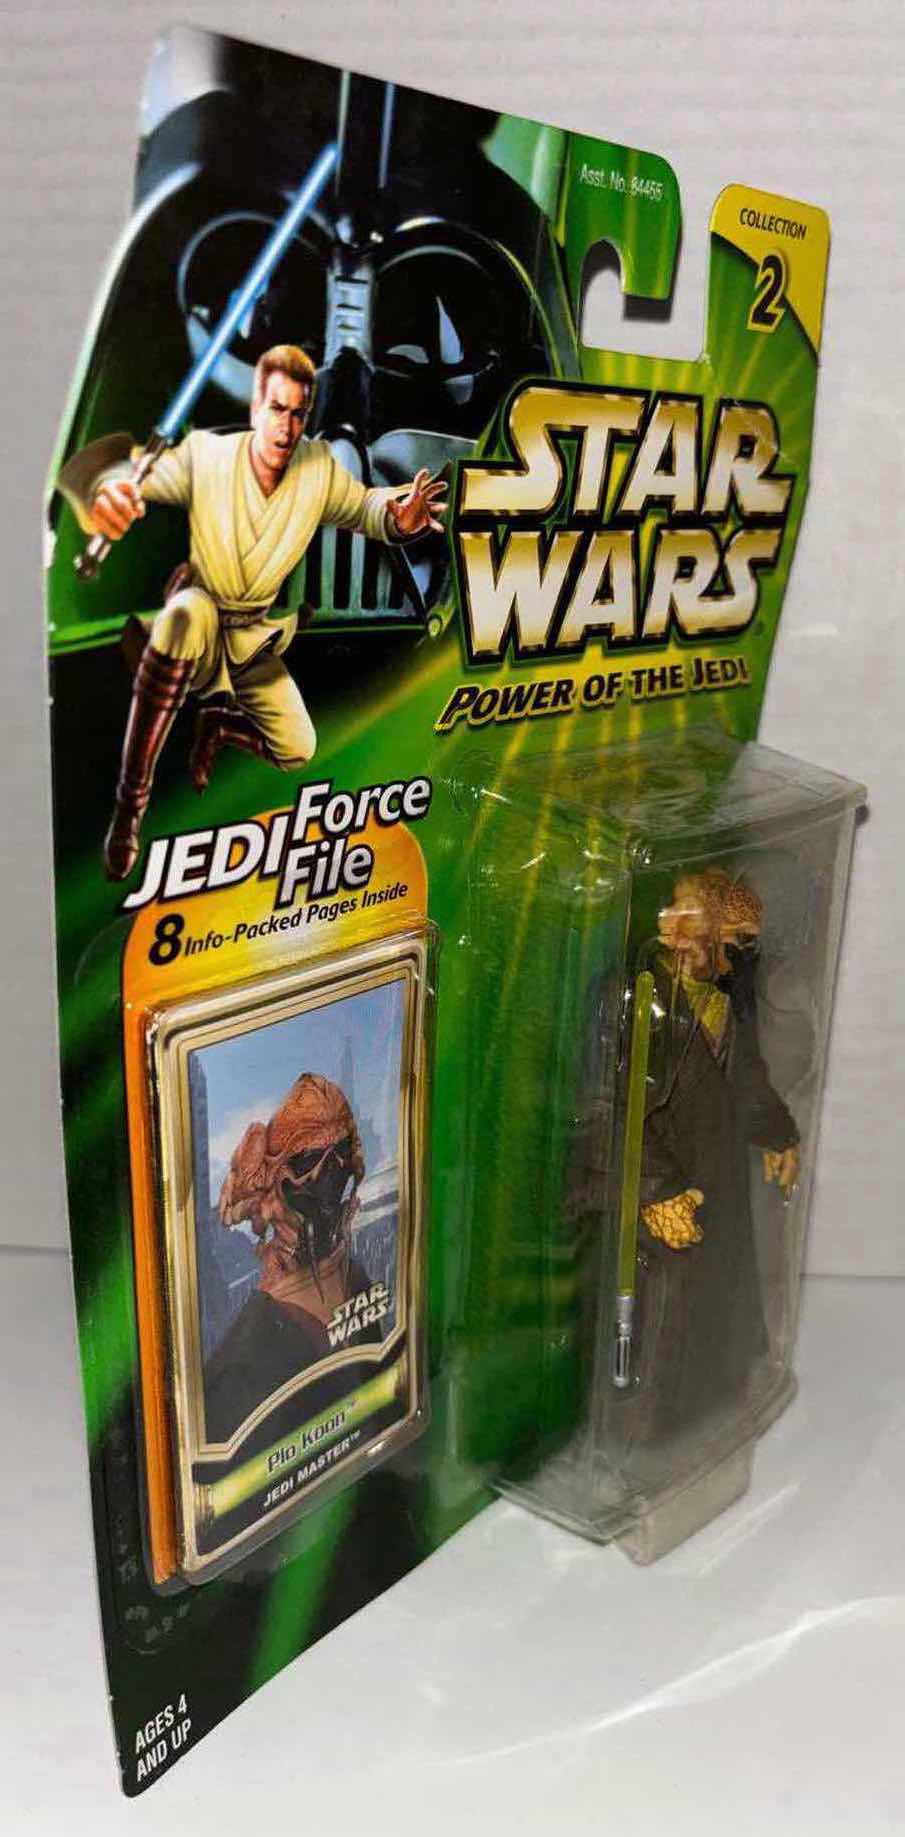 Photo 2 of NEW HASBRO STAR WARS POWER OF THE JEDI ACTION FIGURE, PLO KOON & JEDI FORCE FILE